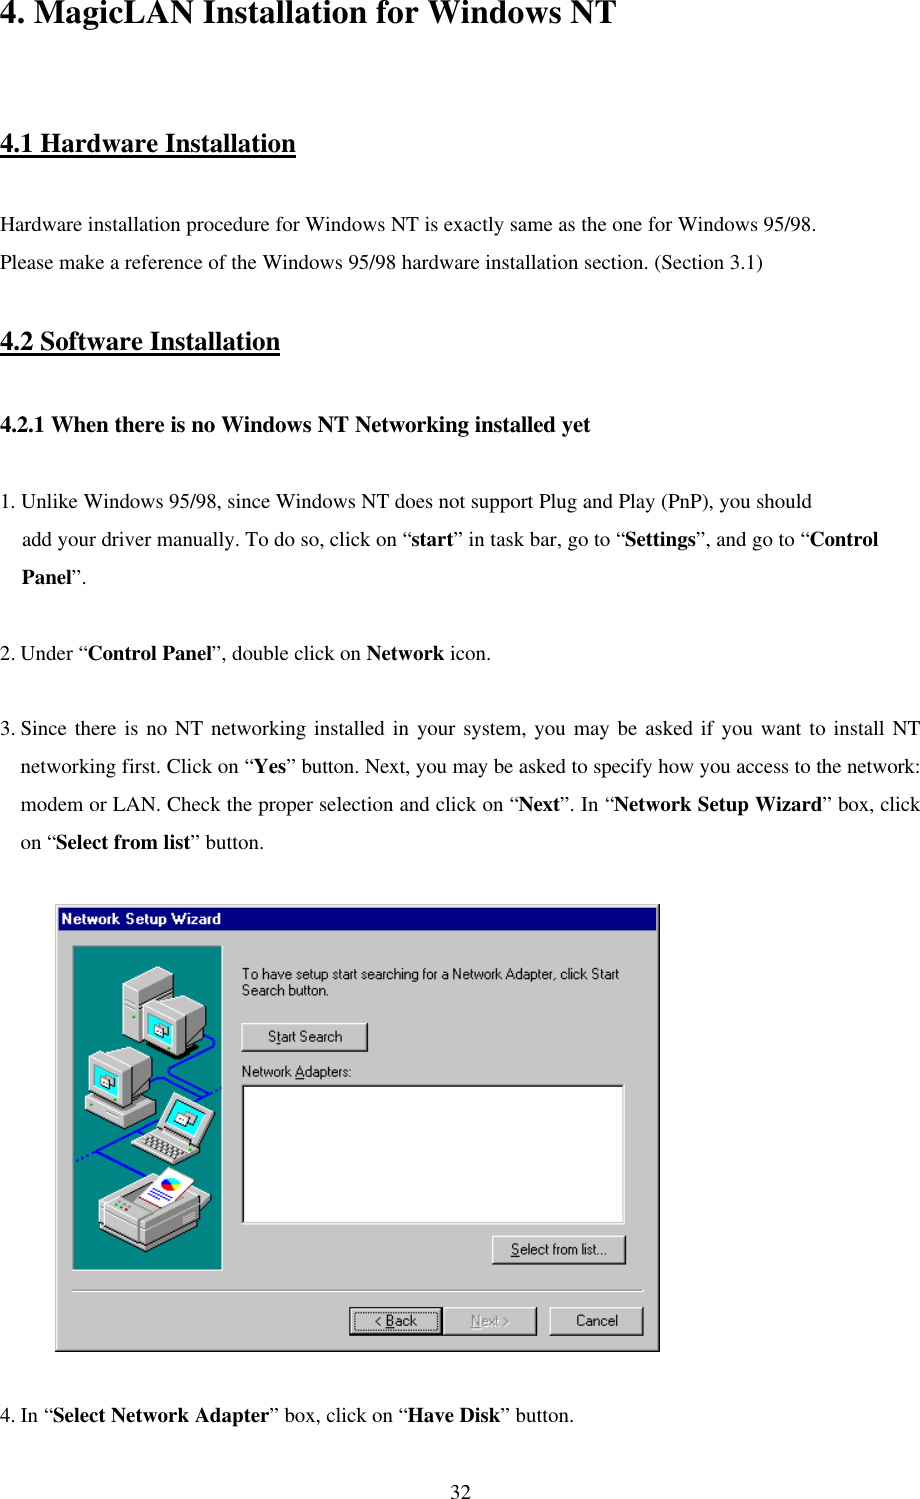 324. MagicLAN Installation for Windows NT4.1 Hardware InstallationHardware installation procedure for Windows NT is exactly same as the one for Windows 95/98.Please make a reference of the Windows 95/98 hardware installation section. (Section 3.1)4.2 Software Installation4.2.1 When there is no Windows NT Networking installed yet1. Unlike Windows 95/98, since Windows NT does not support Plug and Play (PnP), you should    add your driver manually. To do so, click on “start” in task bar, go to “Settings”, and go to “Control    Panel”.2. Under “Control Panel”, double click on Network icon.3. Since there is no NT networking installed in your system, you may be asked if you want to install NTnetworking first. Click on “Yes” button. Next, you may be asked to specify how you access to the network:modem or LAN. Check the proper selection and click on “Next”. In “Network Setup Wizard” box, clickon “Select from list” button.          4. In “Select Network Adapter” box, click on “Have Disk” button.